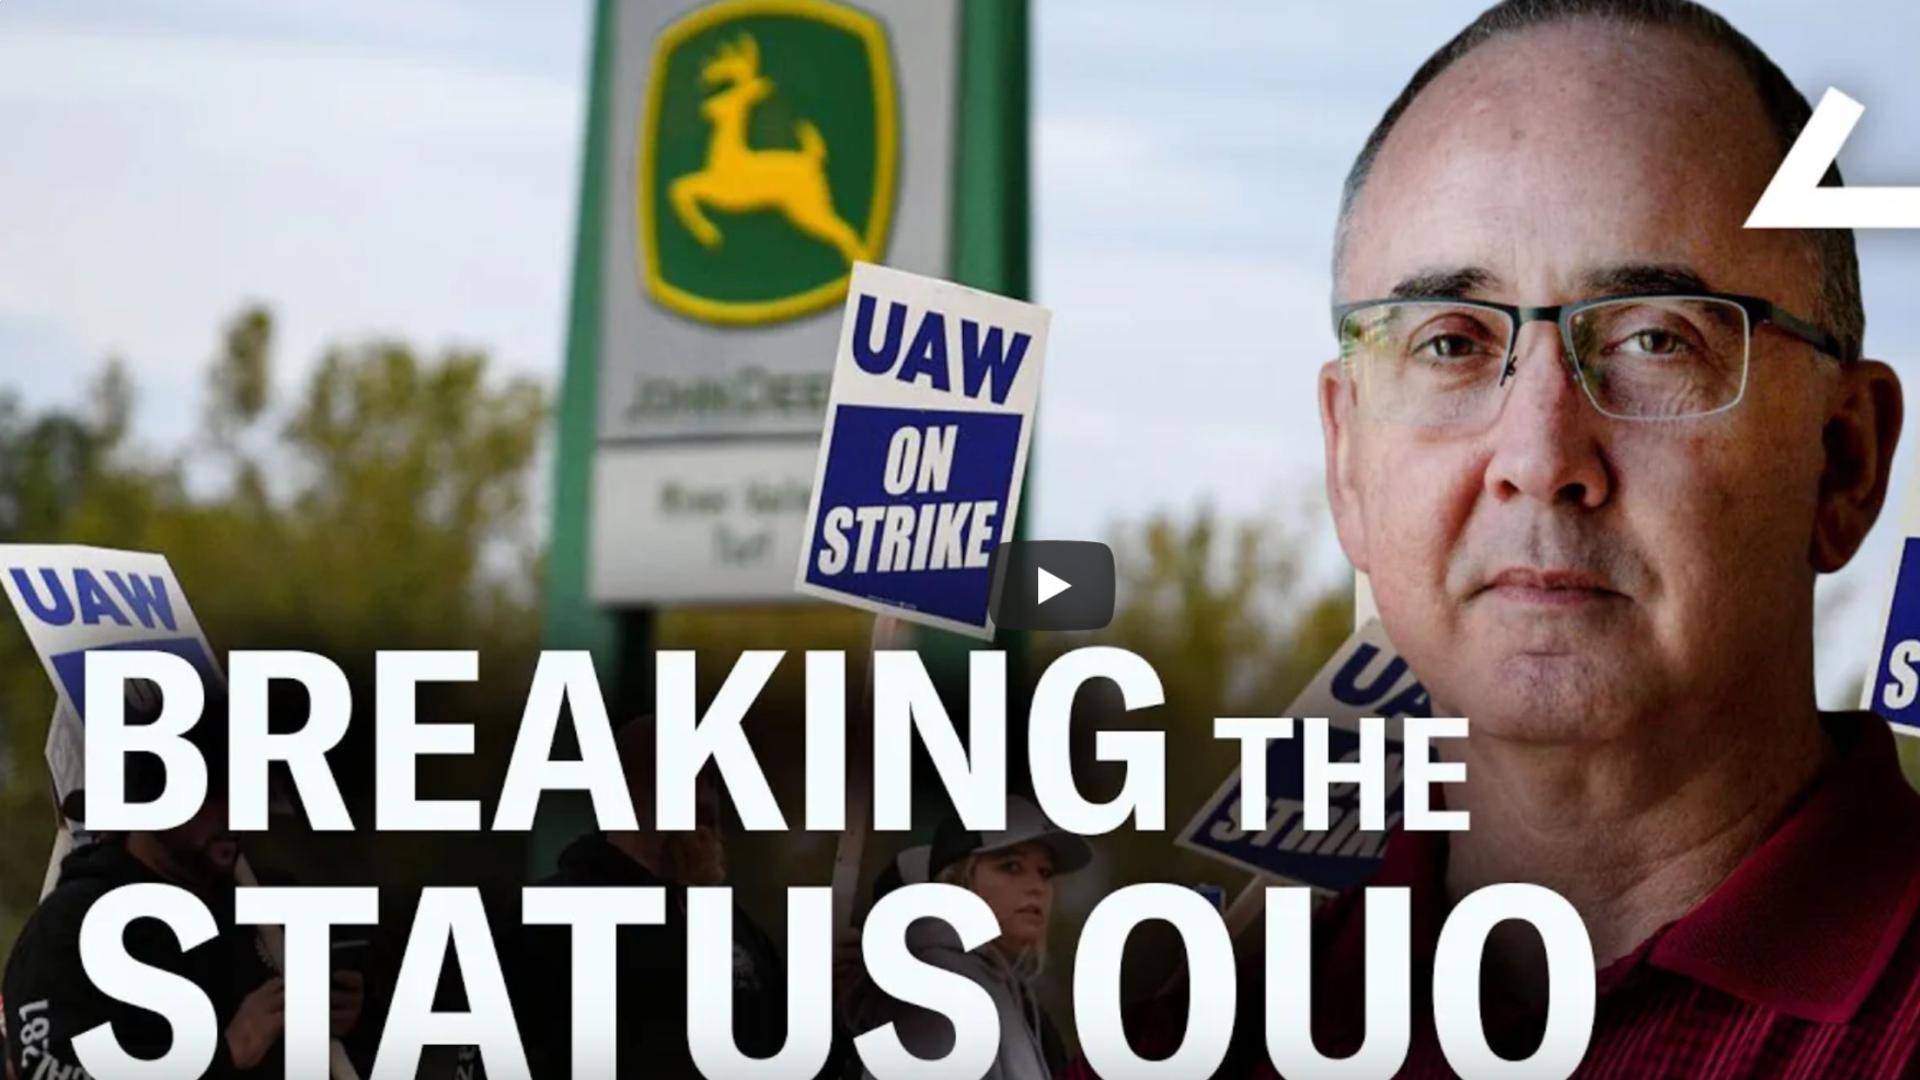 Exclusive Interview: Shawn Fain's Vision for UAW